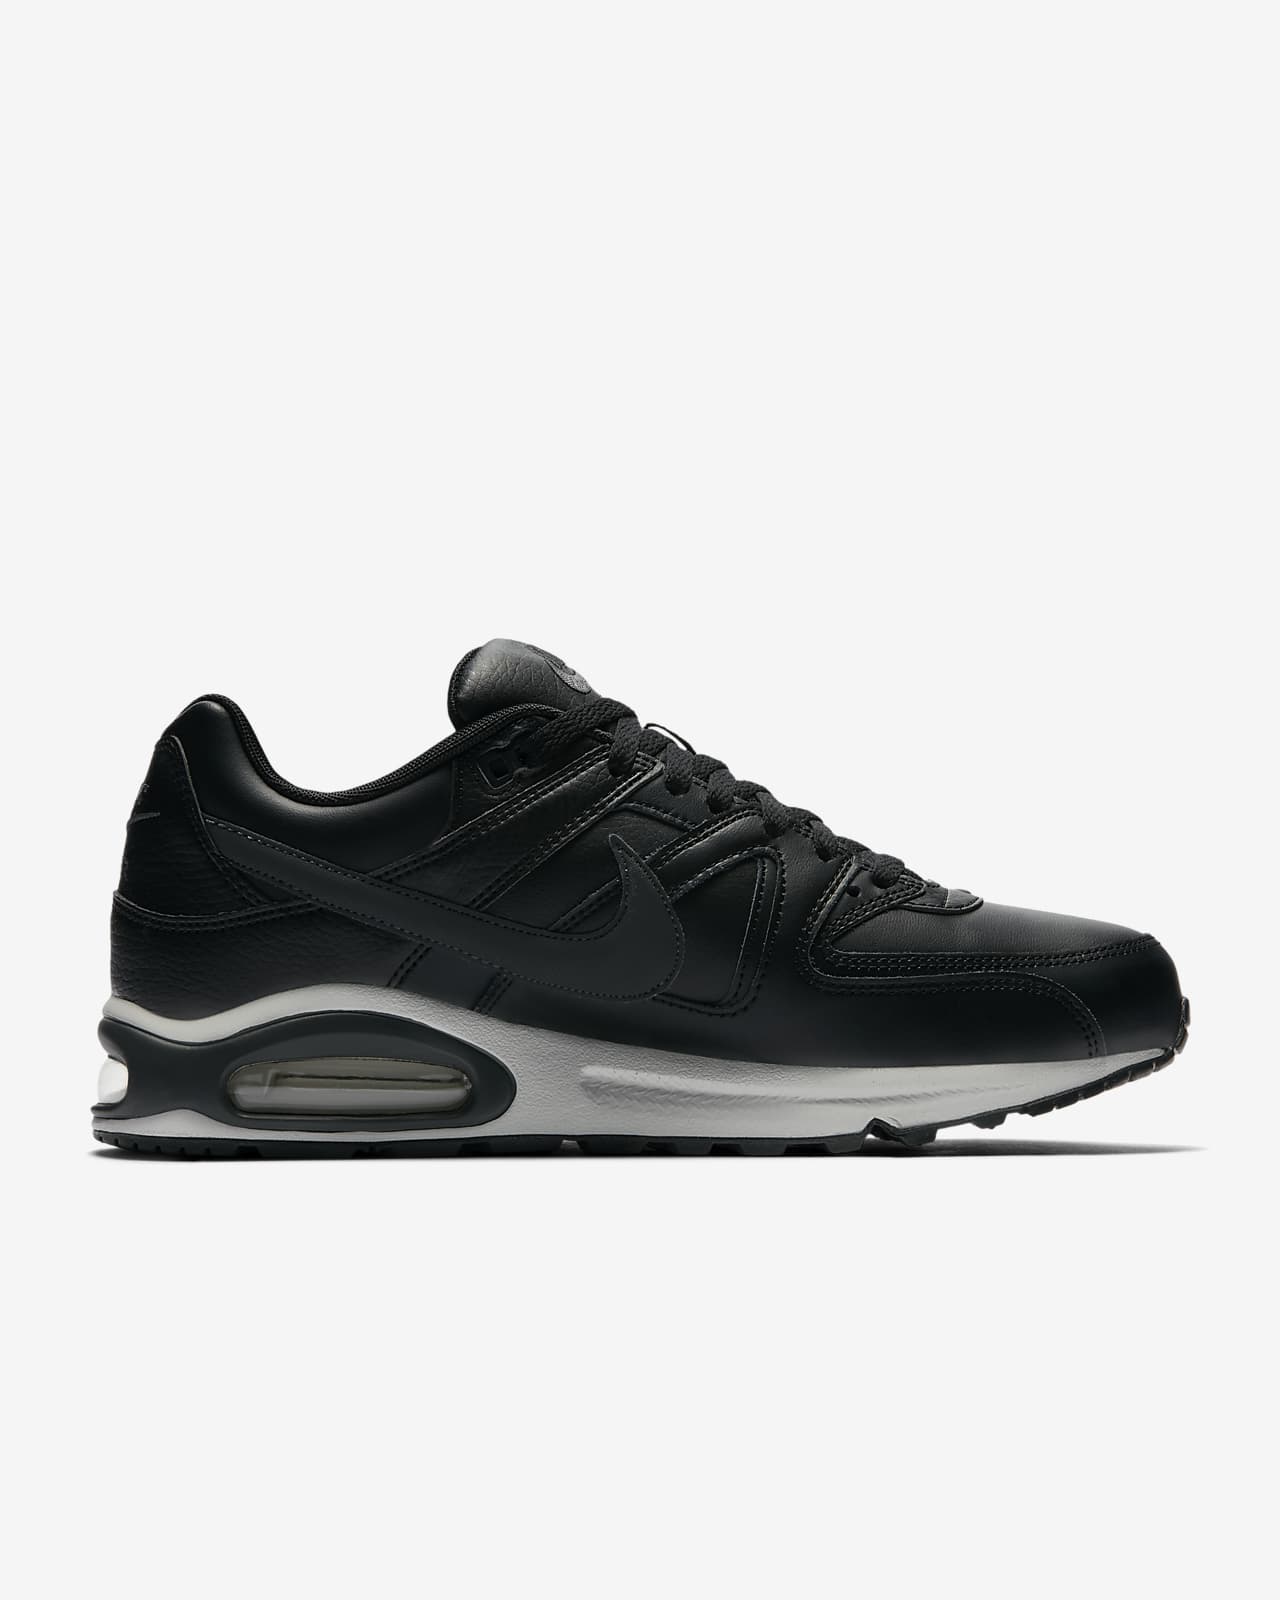 NIKE AIR MAX COMMAND LEATHER 26.5